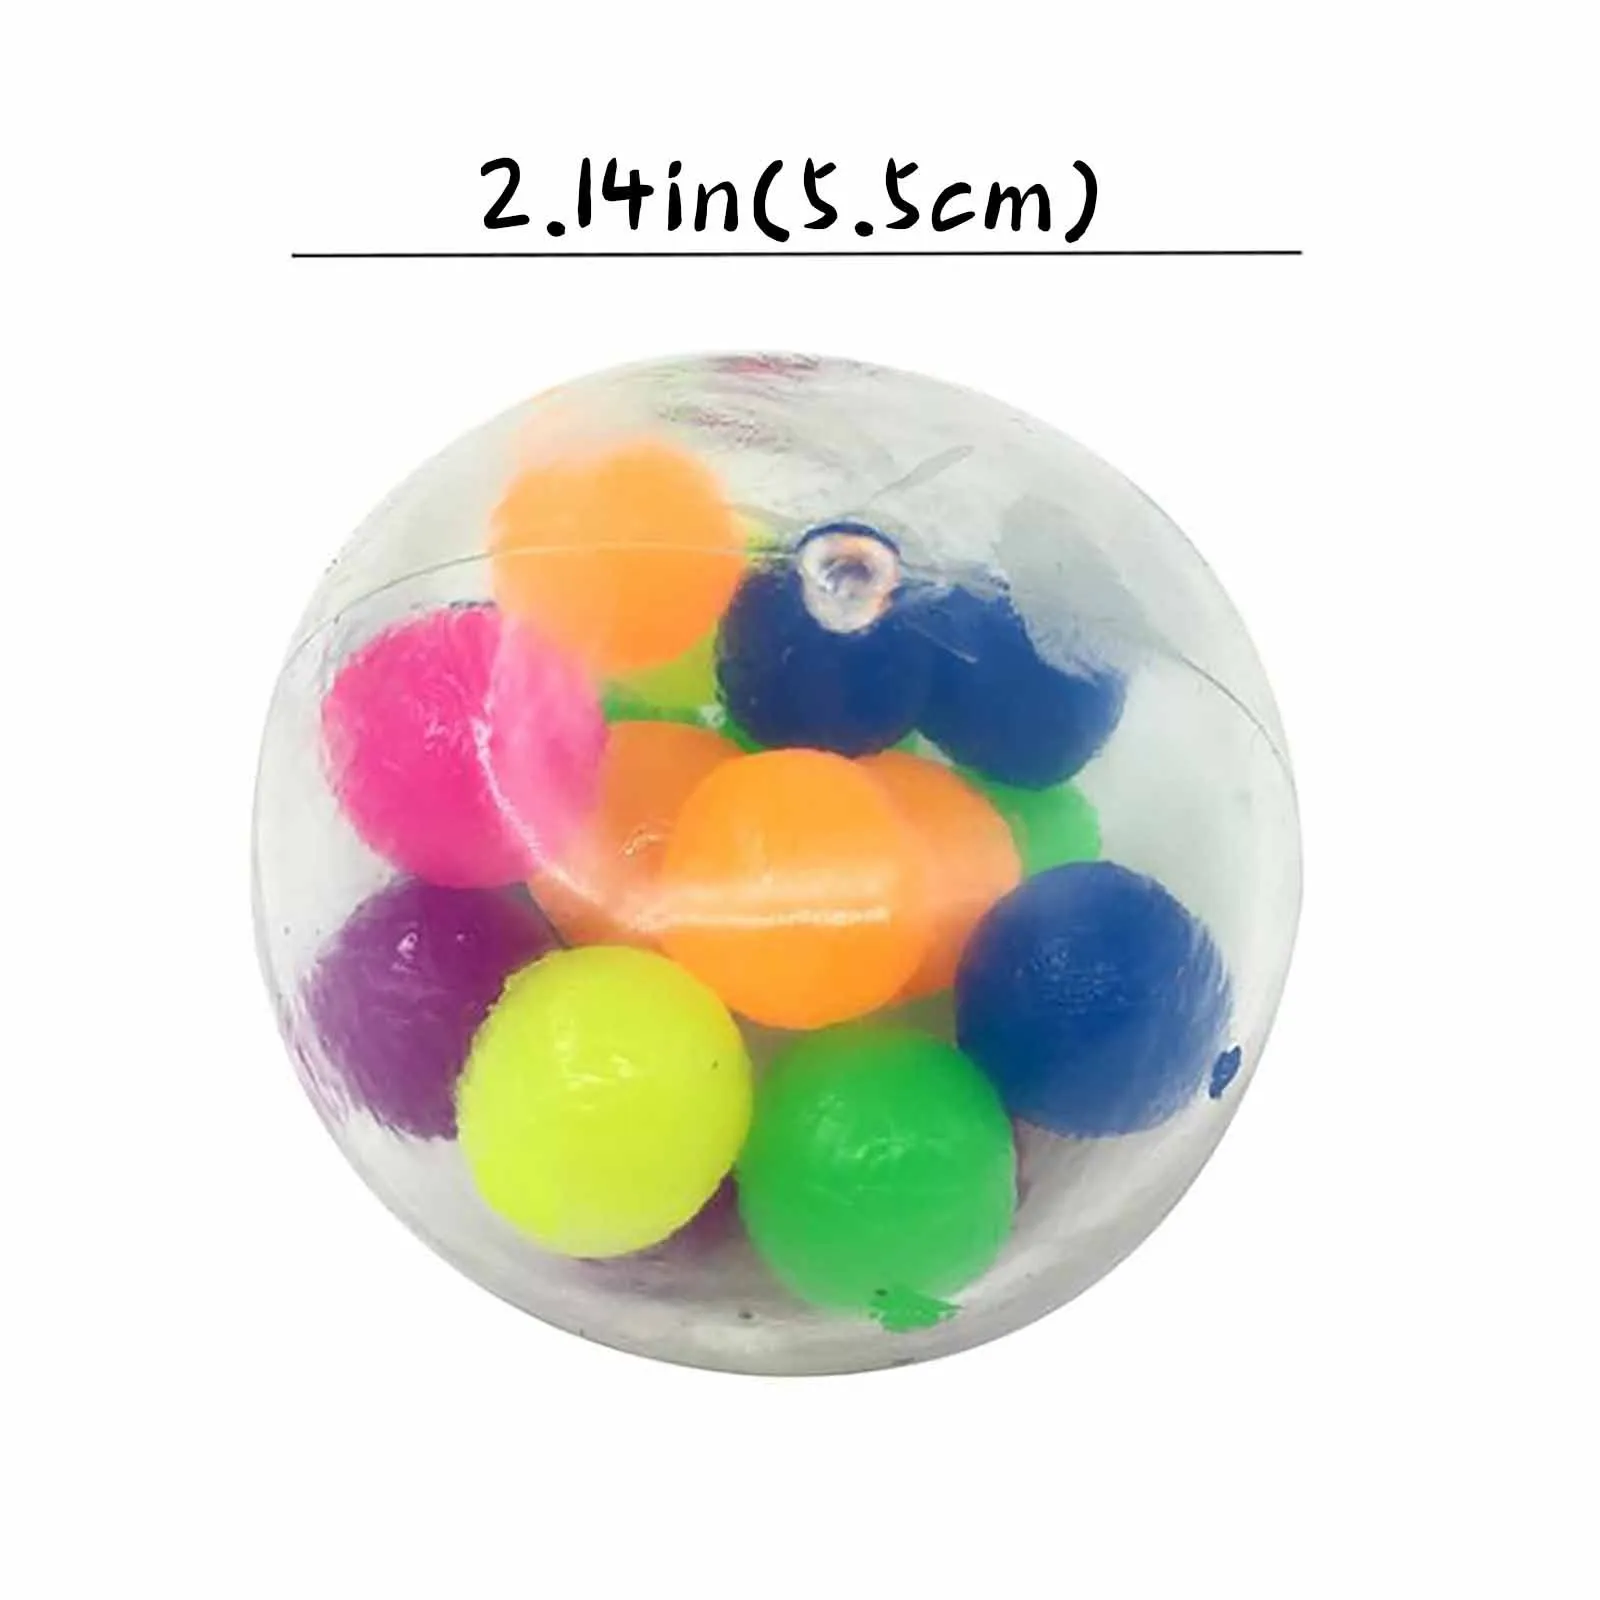 5pc Figet Toys Color Sensory Toy Office Stress Ball Pressure Ball Stress Reliever Toy Figet Toys Adult Fidget Toys Set enlarge